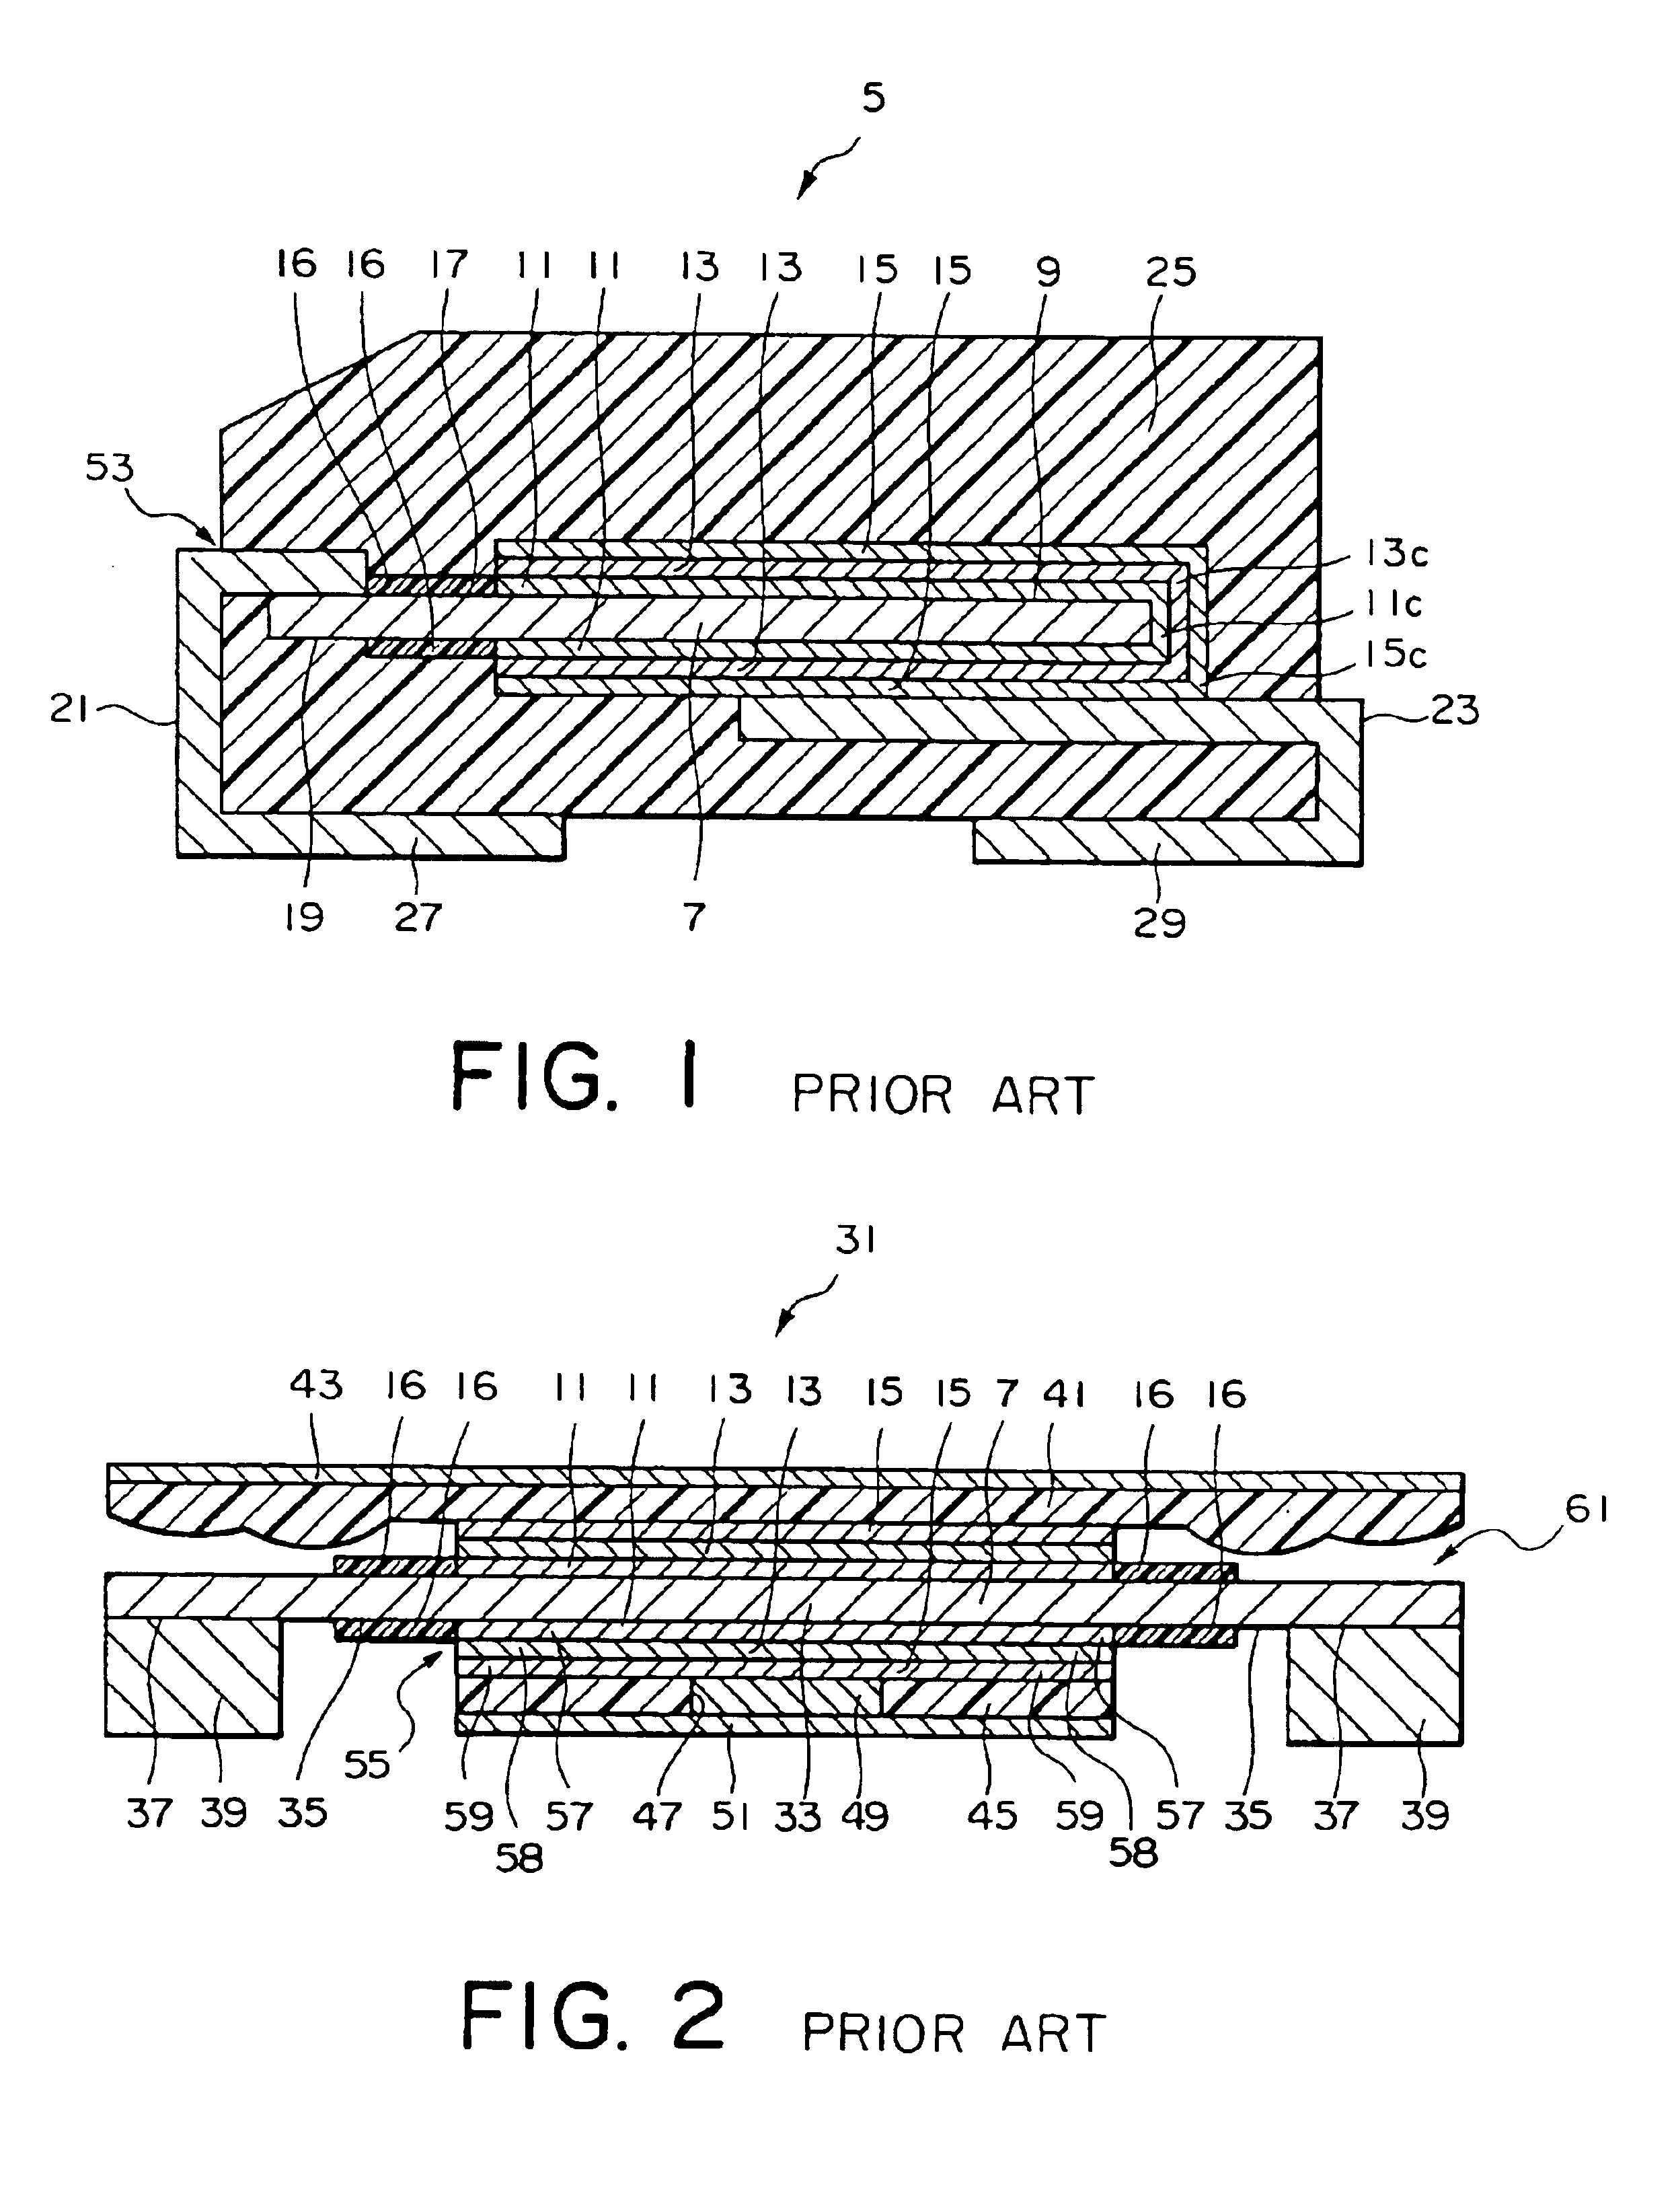 Thin-type surface-mount capacitor